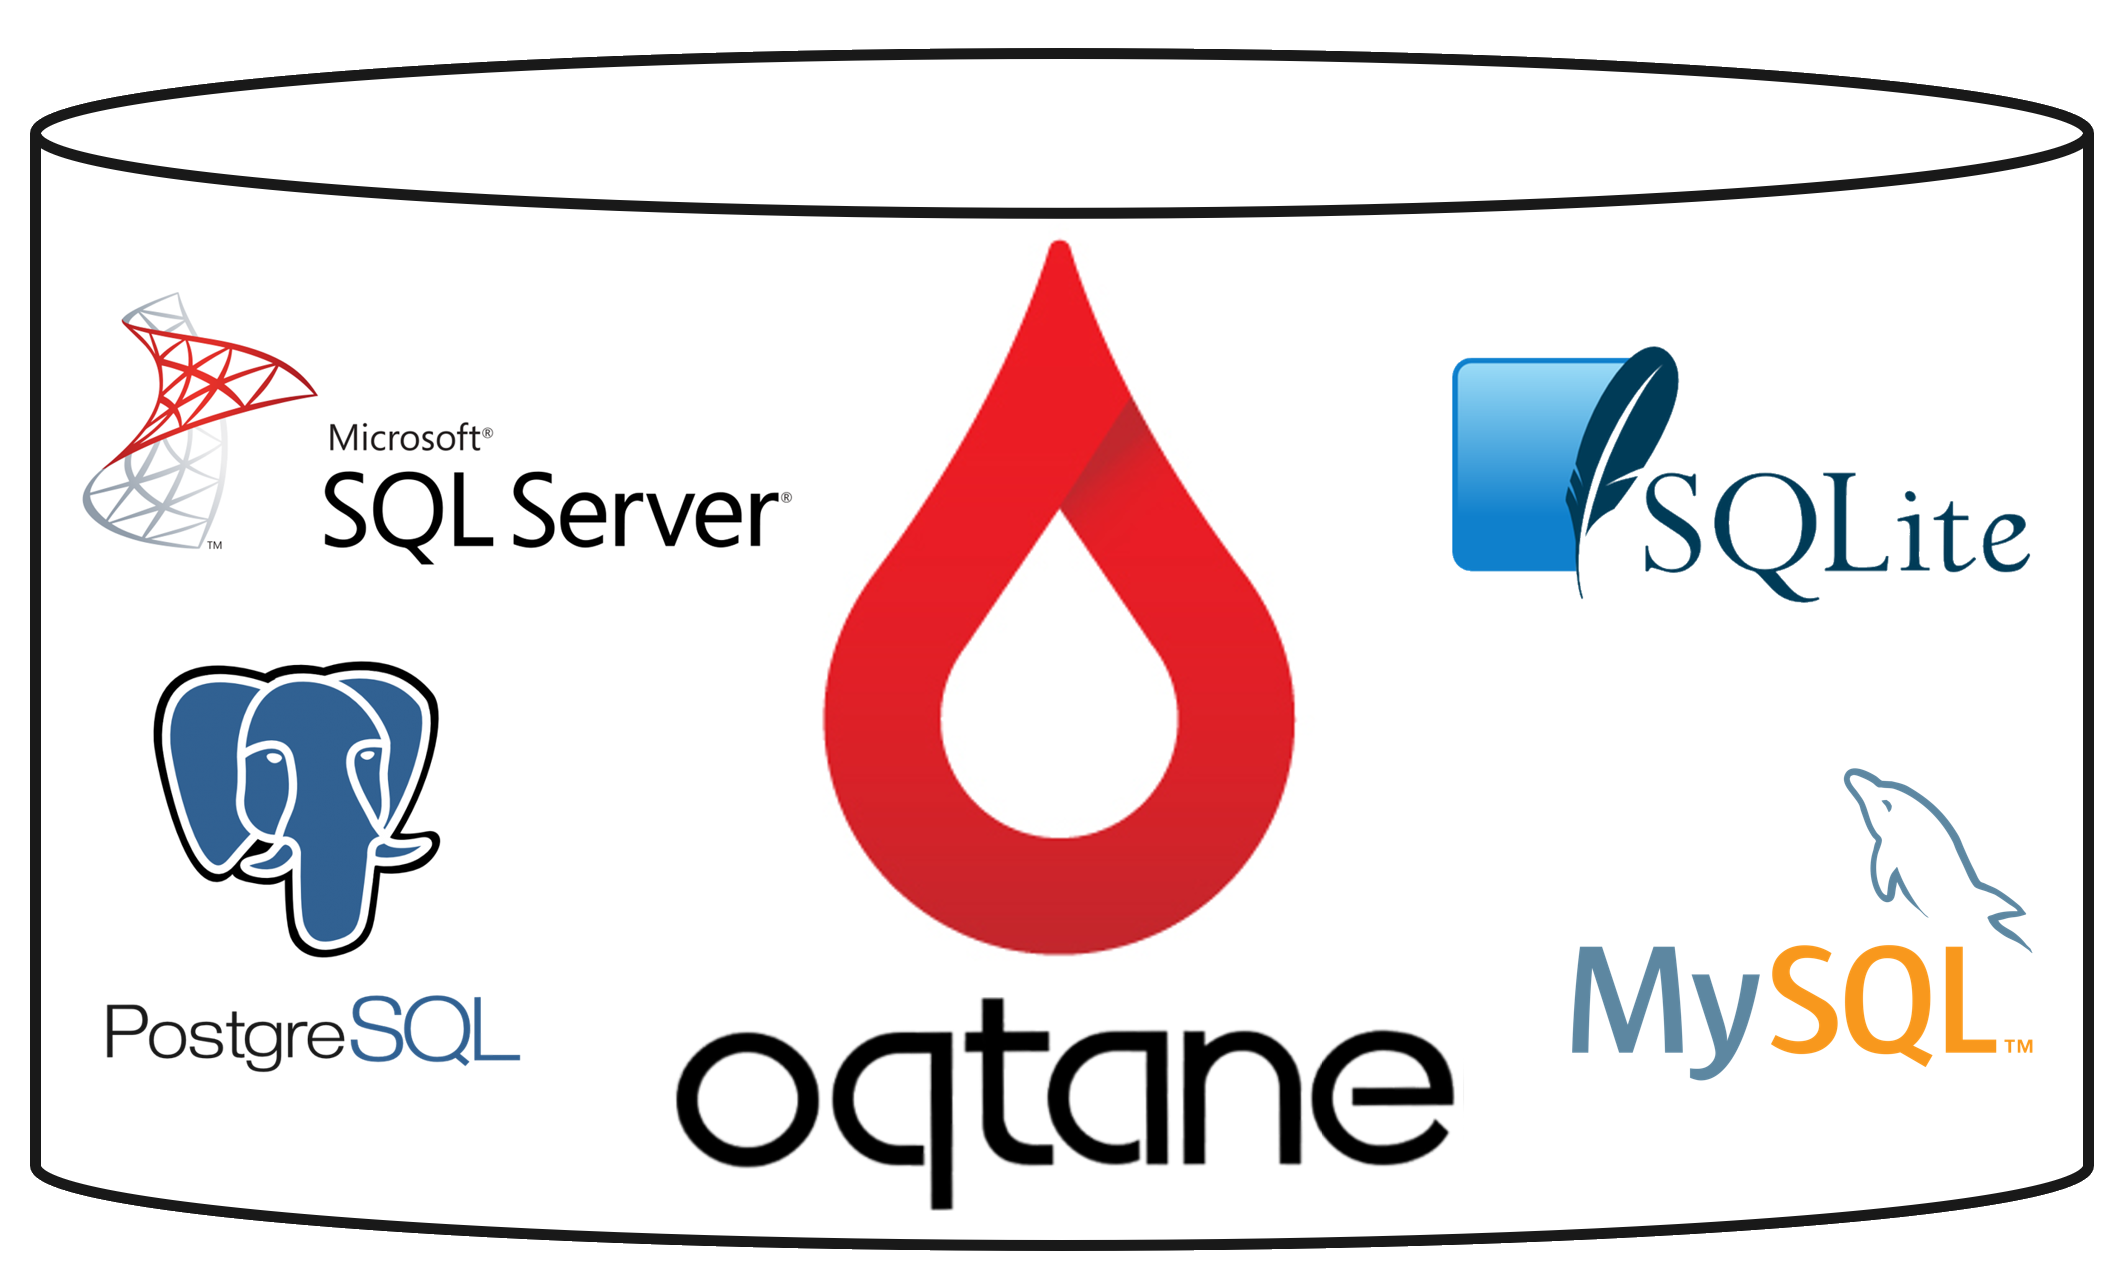 OQTANE 2.1 NOW SUPPORTS MULTIPLE DATABASES